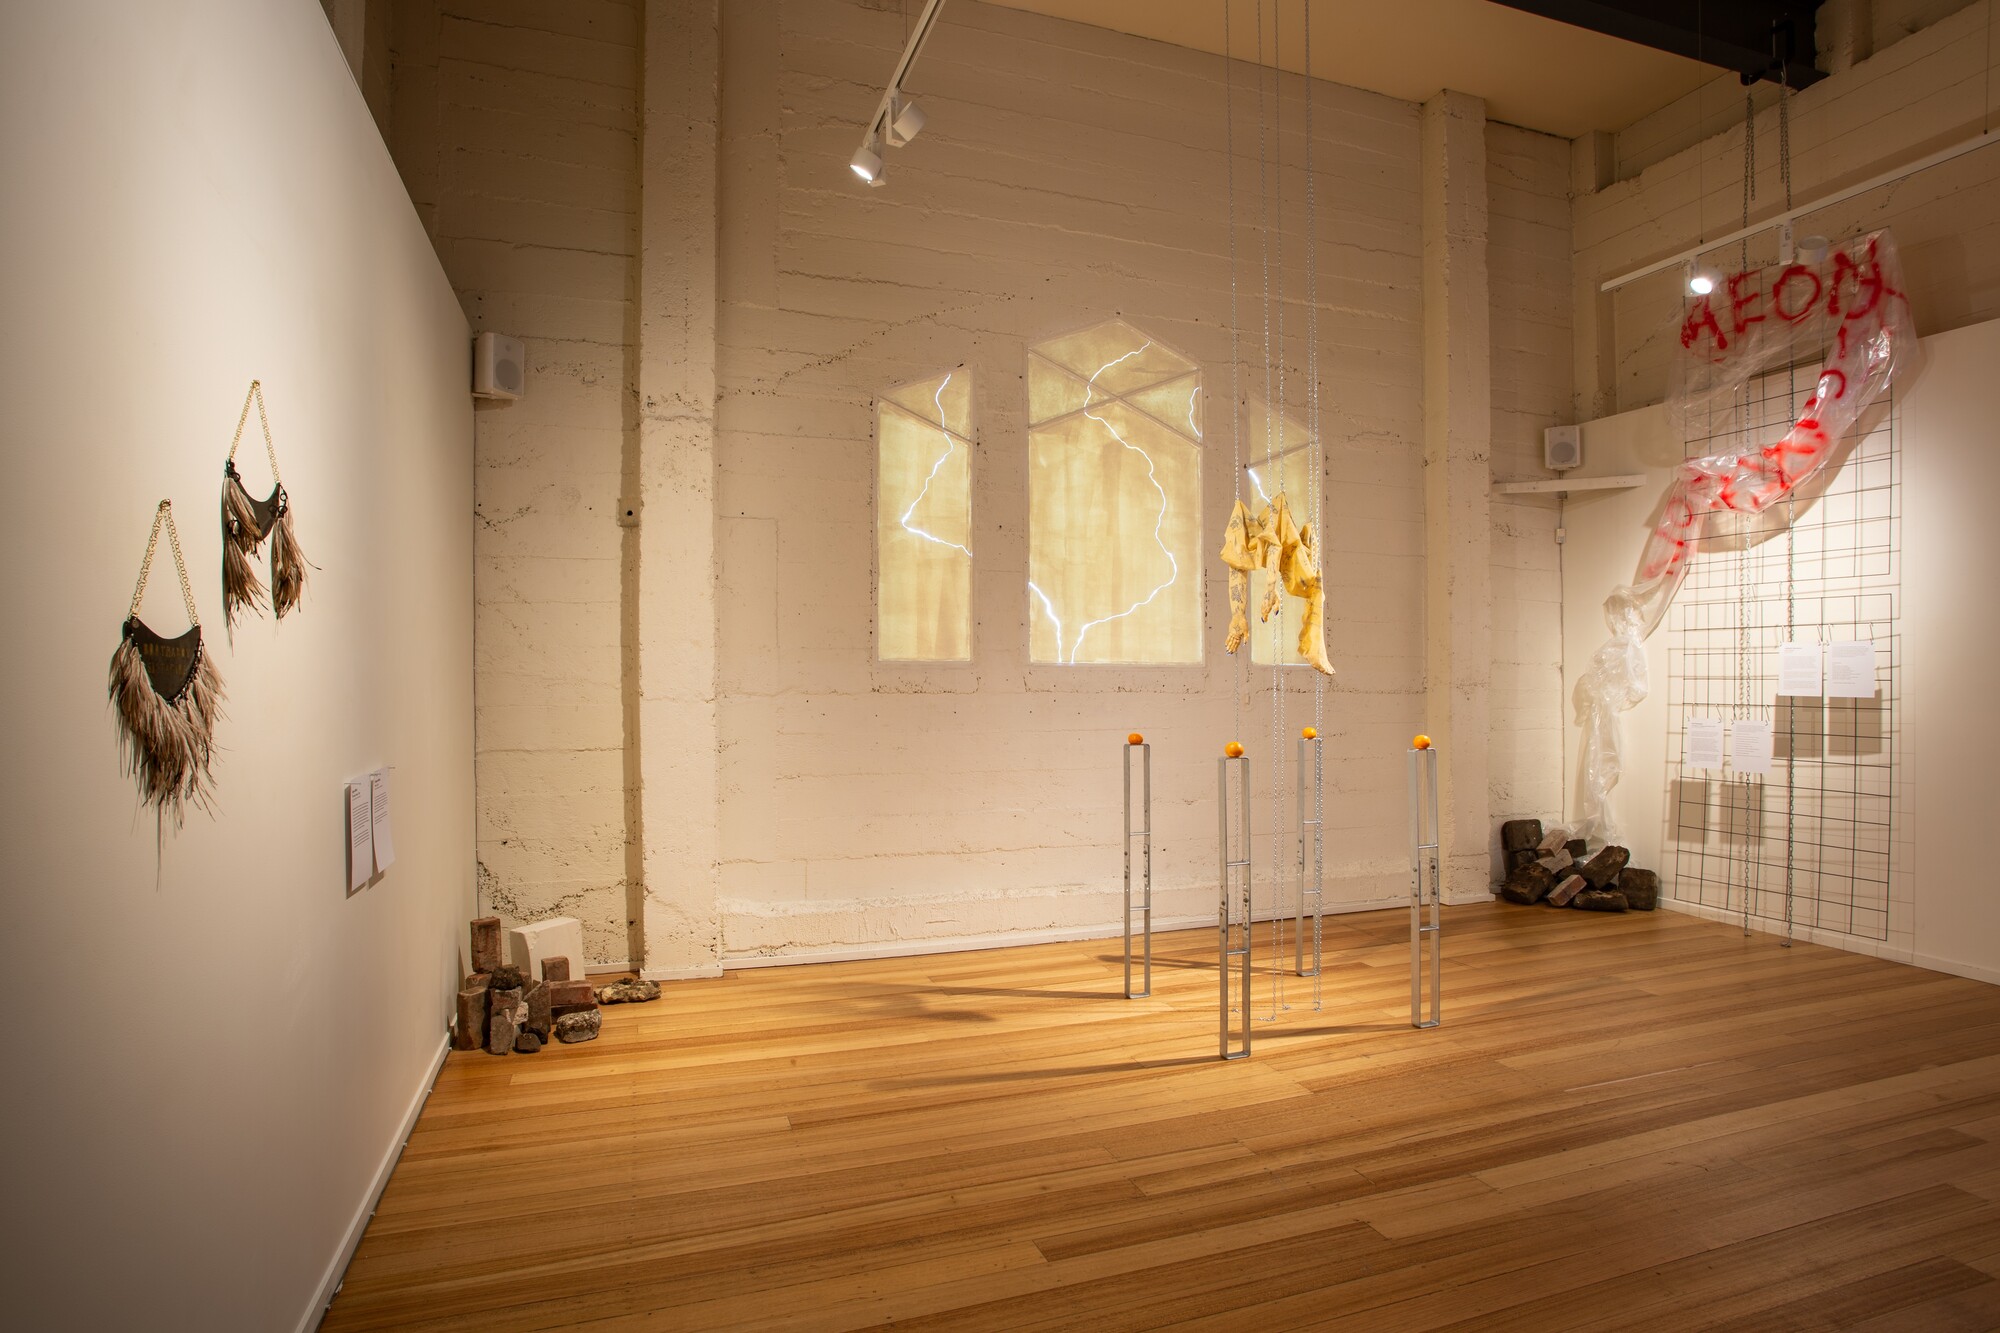 Installation view of <em>Aeon Resurrection</em>, 2022. Ange Jeffrey, Brothaboy Sistagirl, 2021. Brass, emu feathers, hemp, brass black; Ange Jeffrey, Murru, 2021. Brass, emu feathers, hemp, sterling silver; Em Finucane, The Body as a Space we Inhabit, 2019. Latex, acrylic nails, ballpoint pen, oranges, incense sticks, architectural anchors. Image courtesy of the gallery. Photo: Lucy Foster